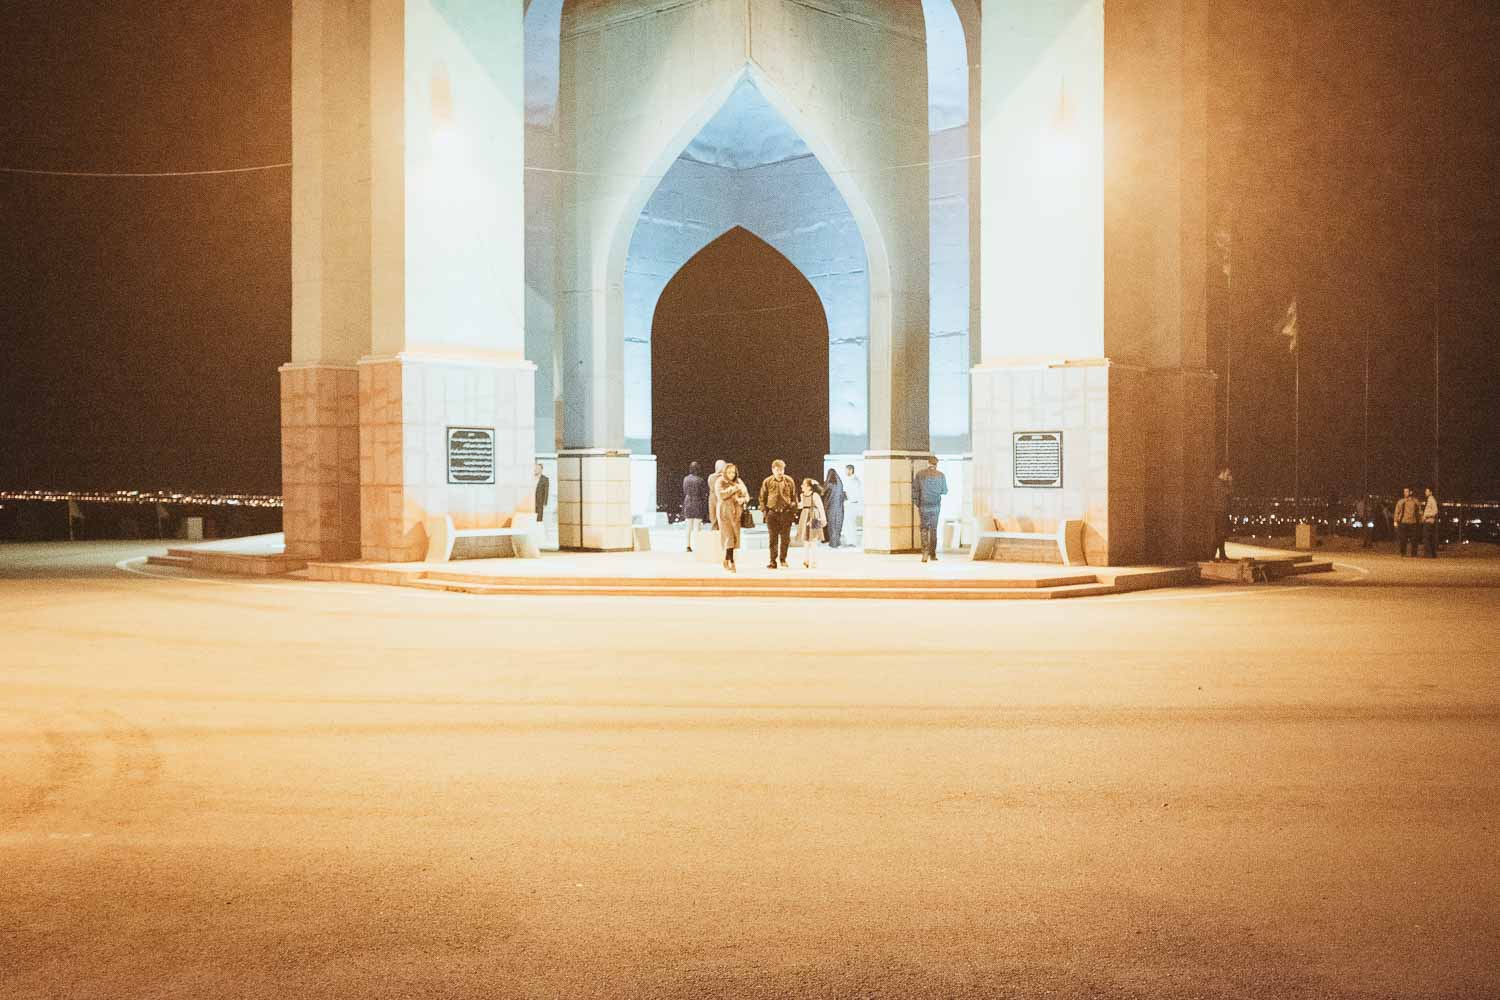 This photo shows the fine art print A War Memorial in Qazvin by Philip Reitsperger